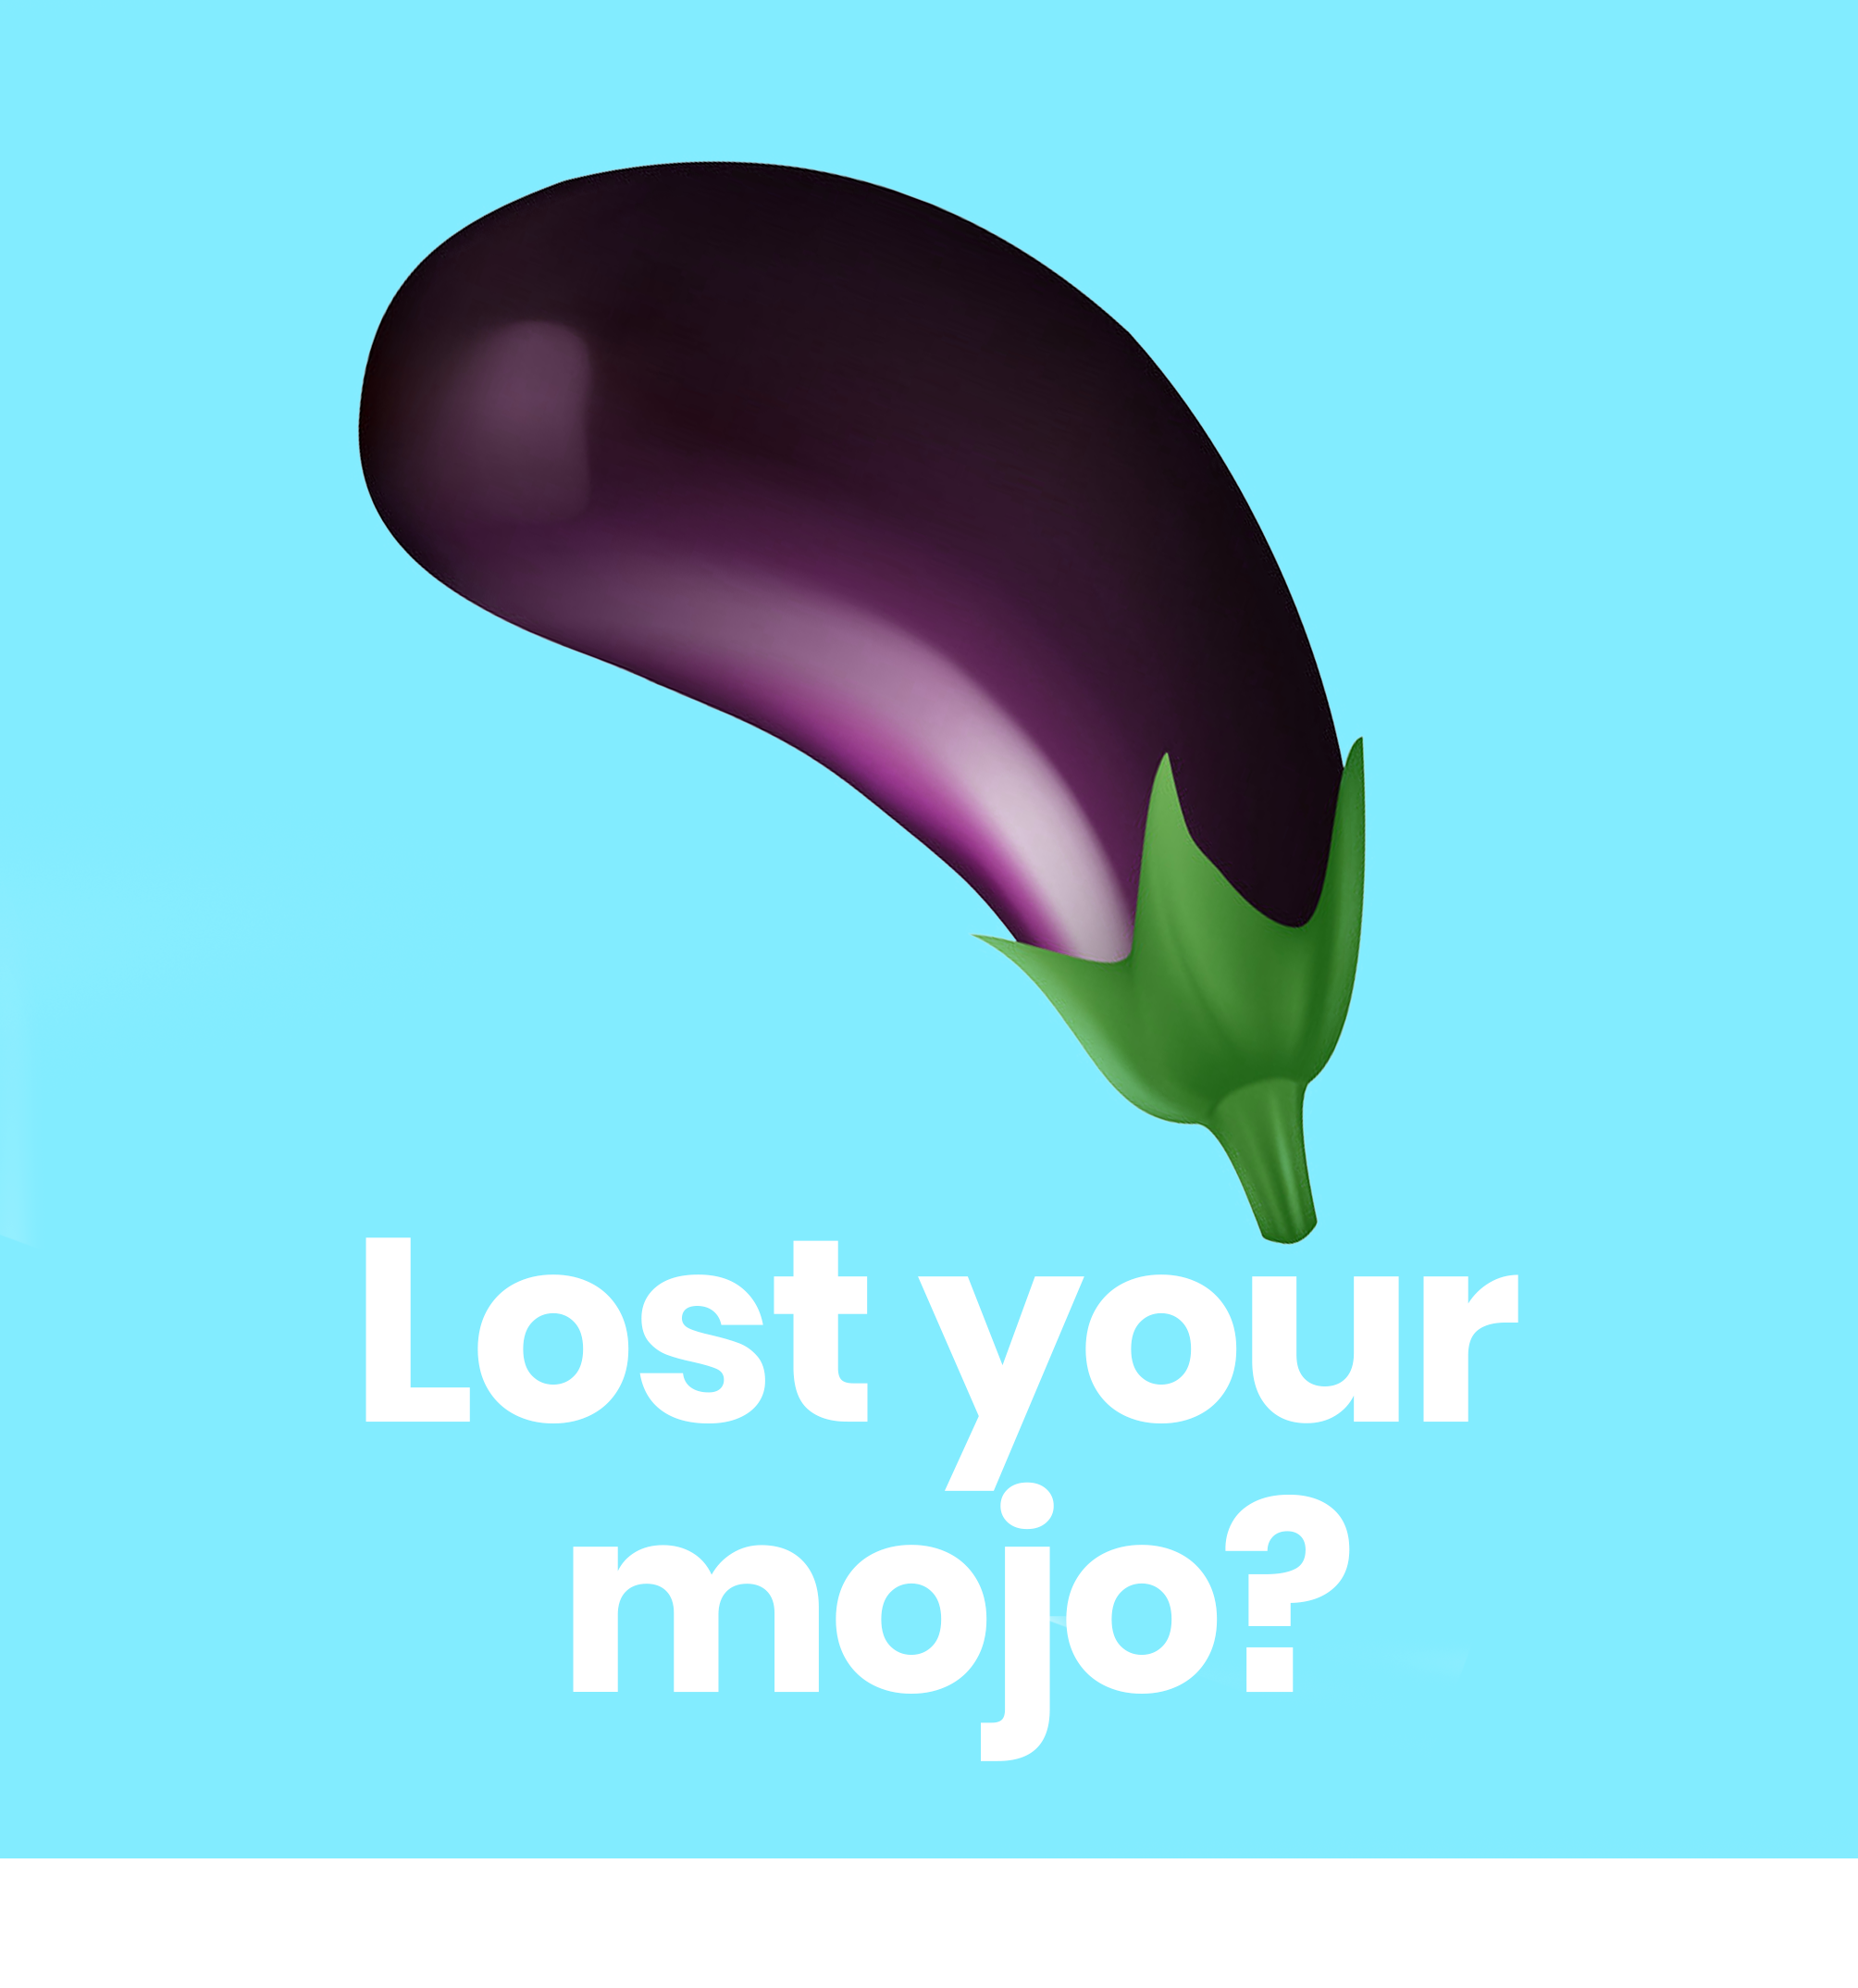 Image of upside down eggplant with words 'Lost your mojo?'